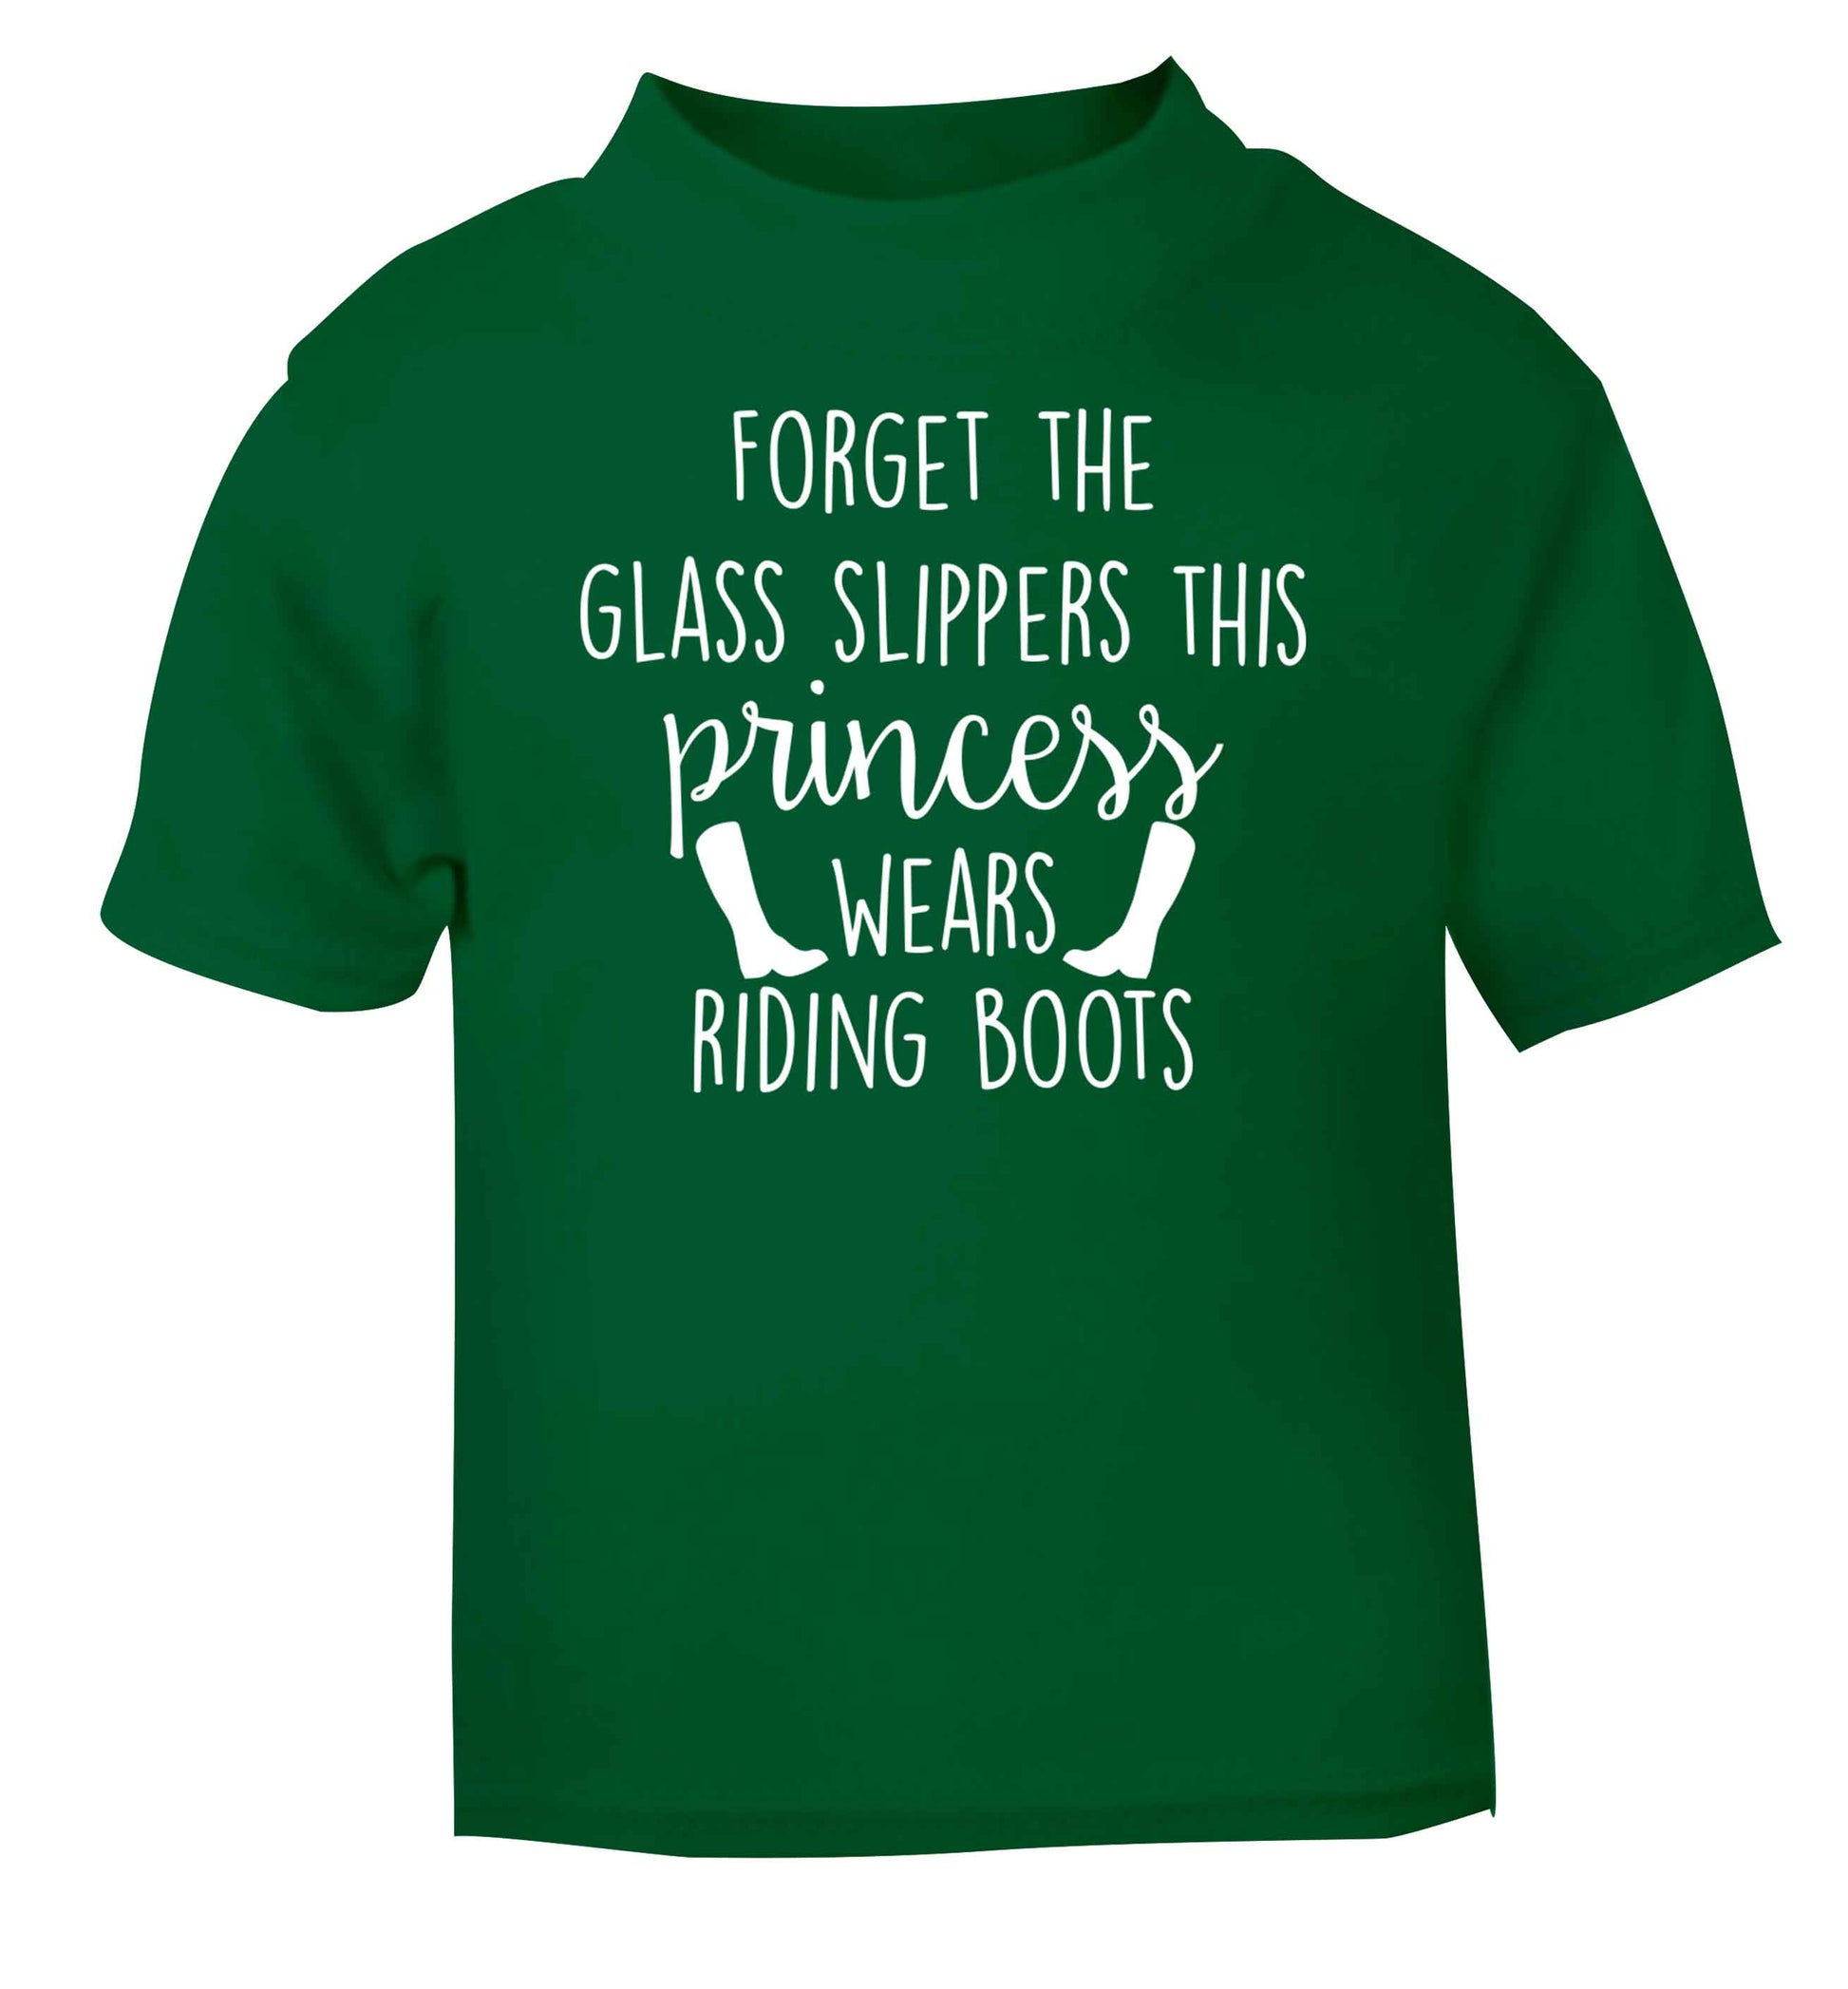 Forget the glass slippers this princess wears riding boots green baby toddler Tshirt 2 Years